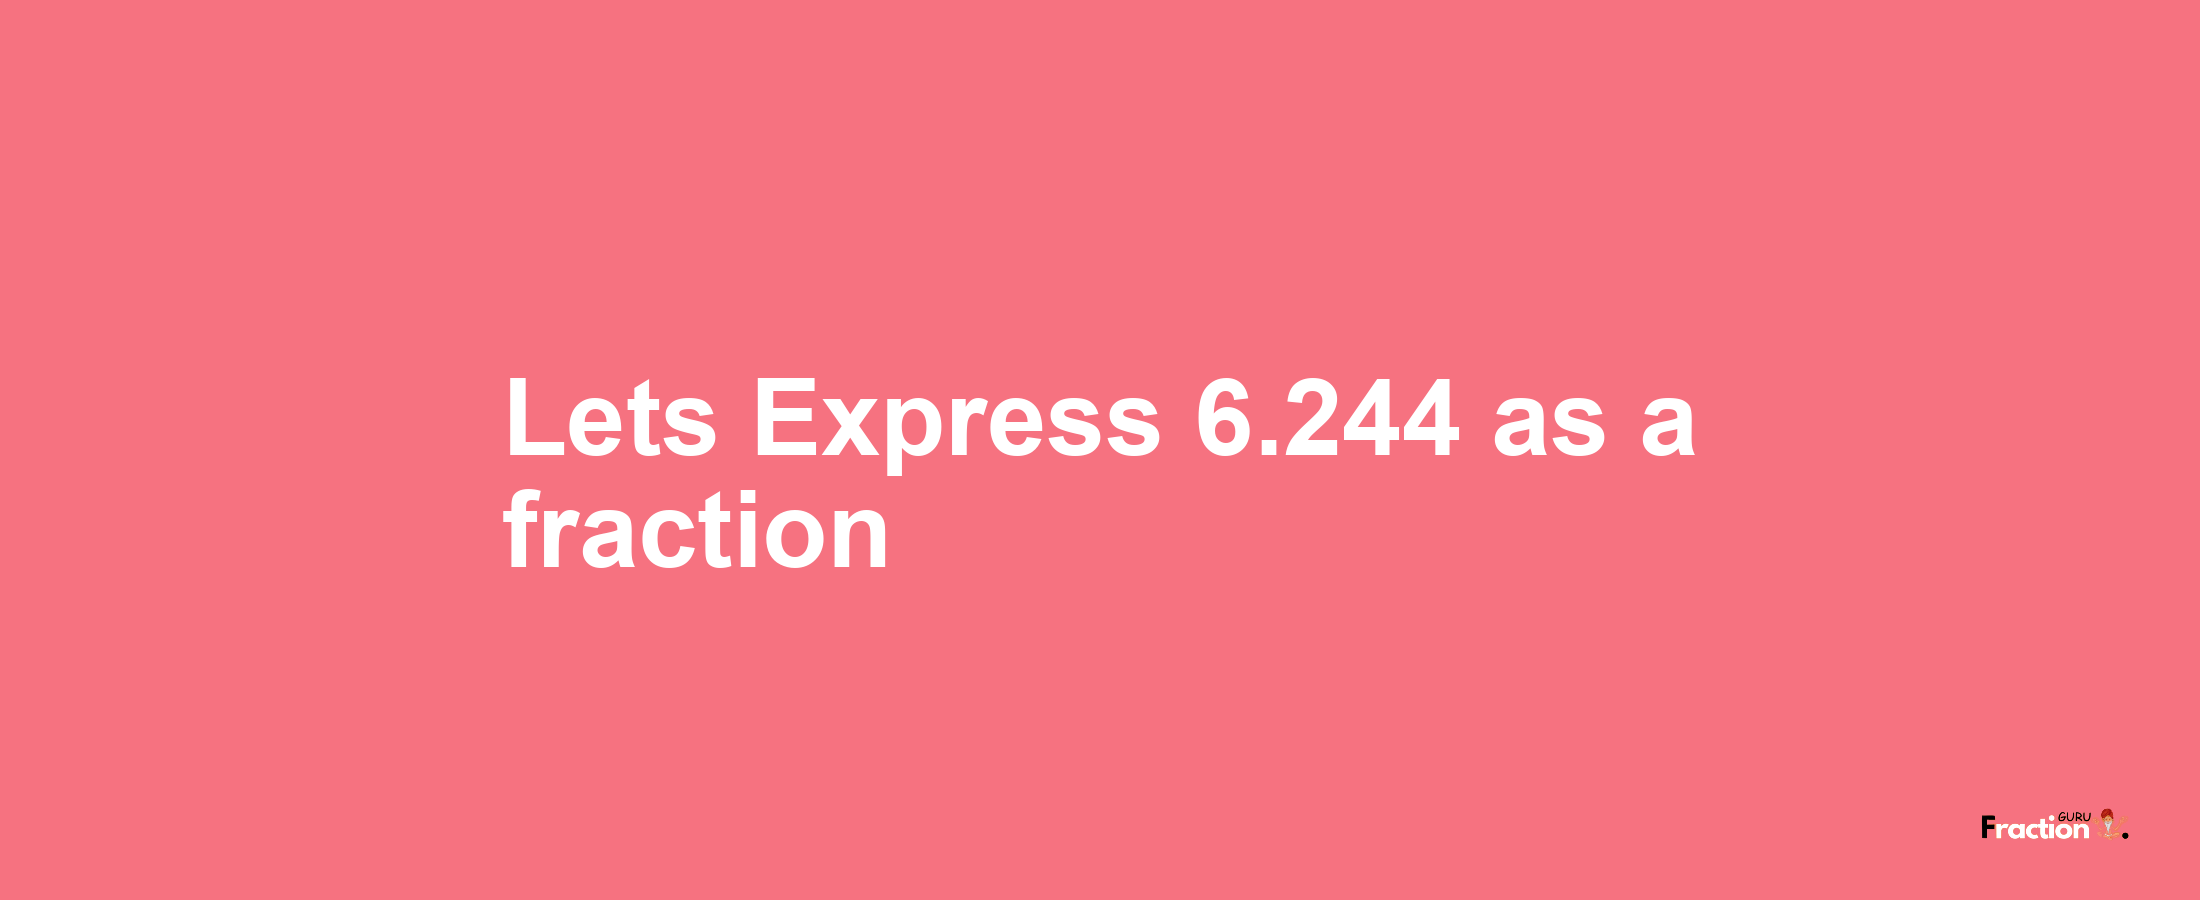 Lets Express 6.244 as afraction